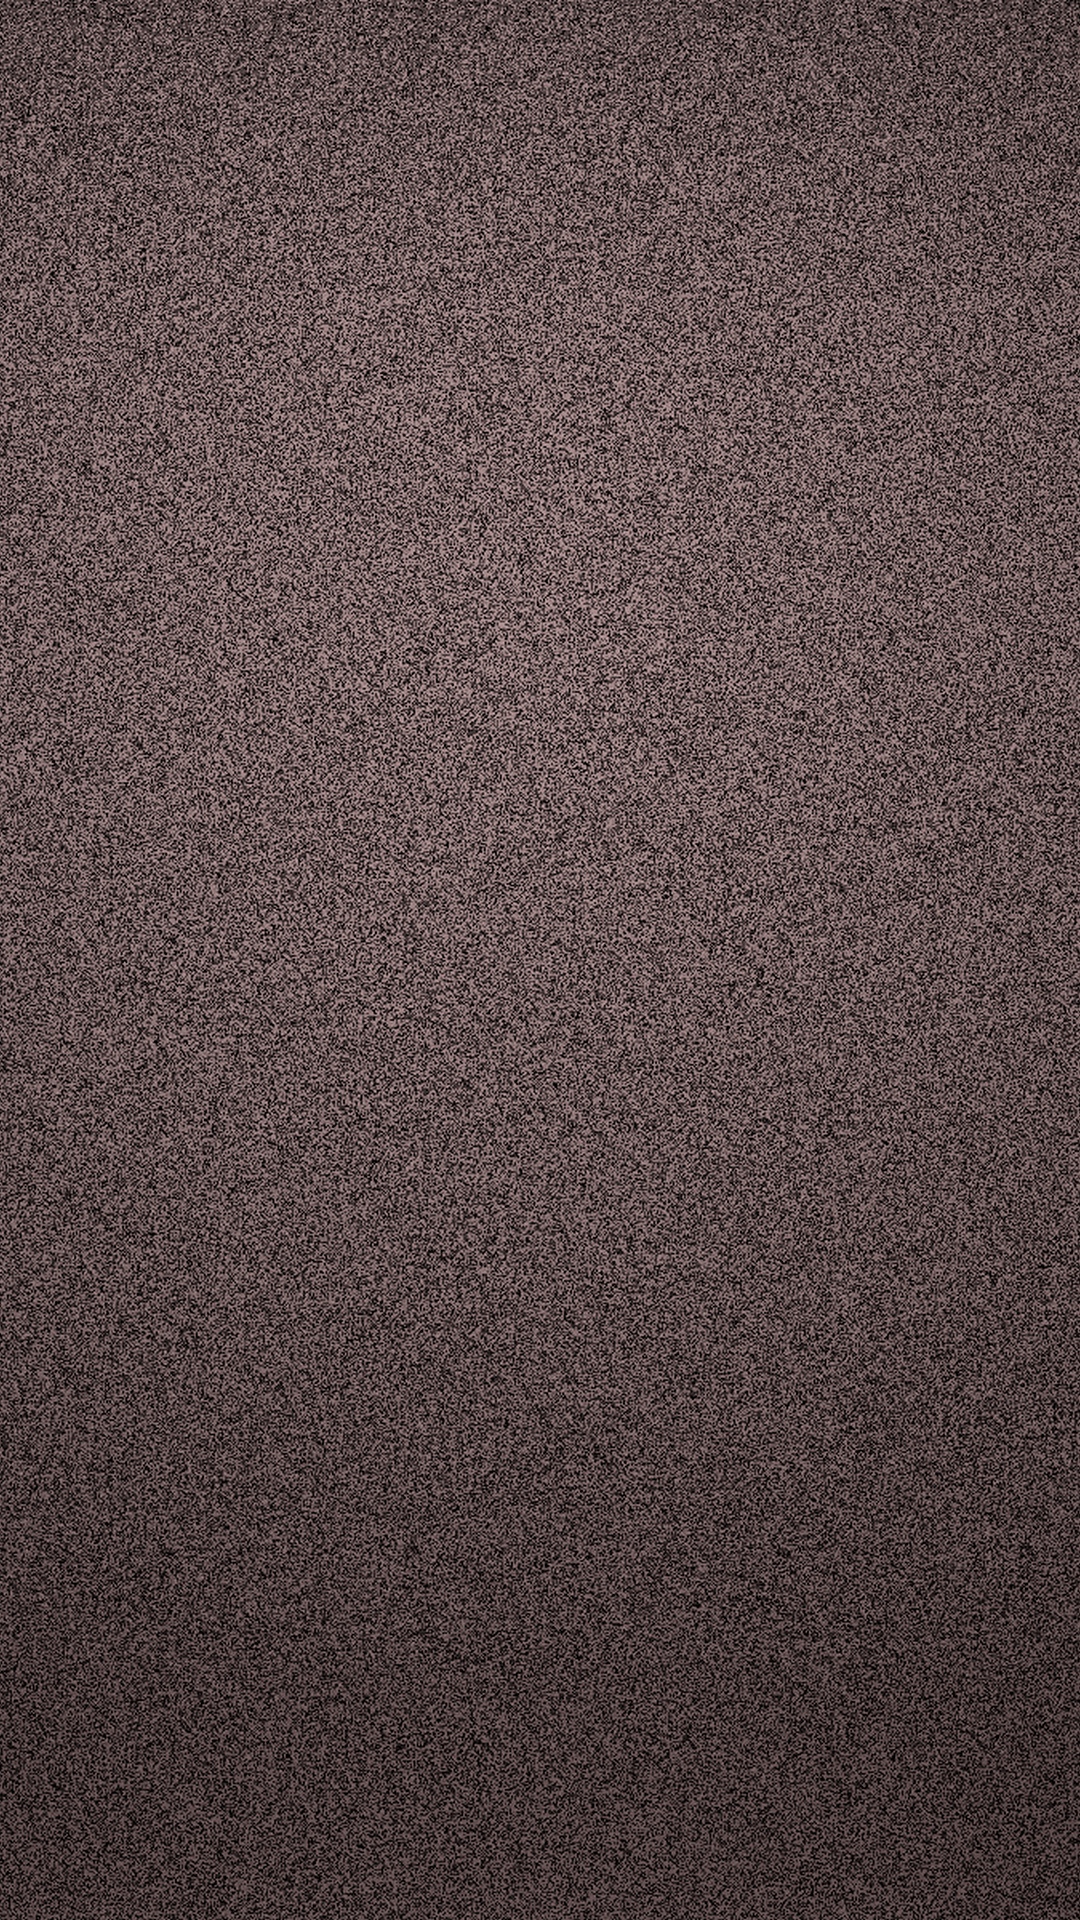 Galaxy S4 background with granite stone texture 1080x1920